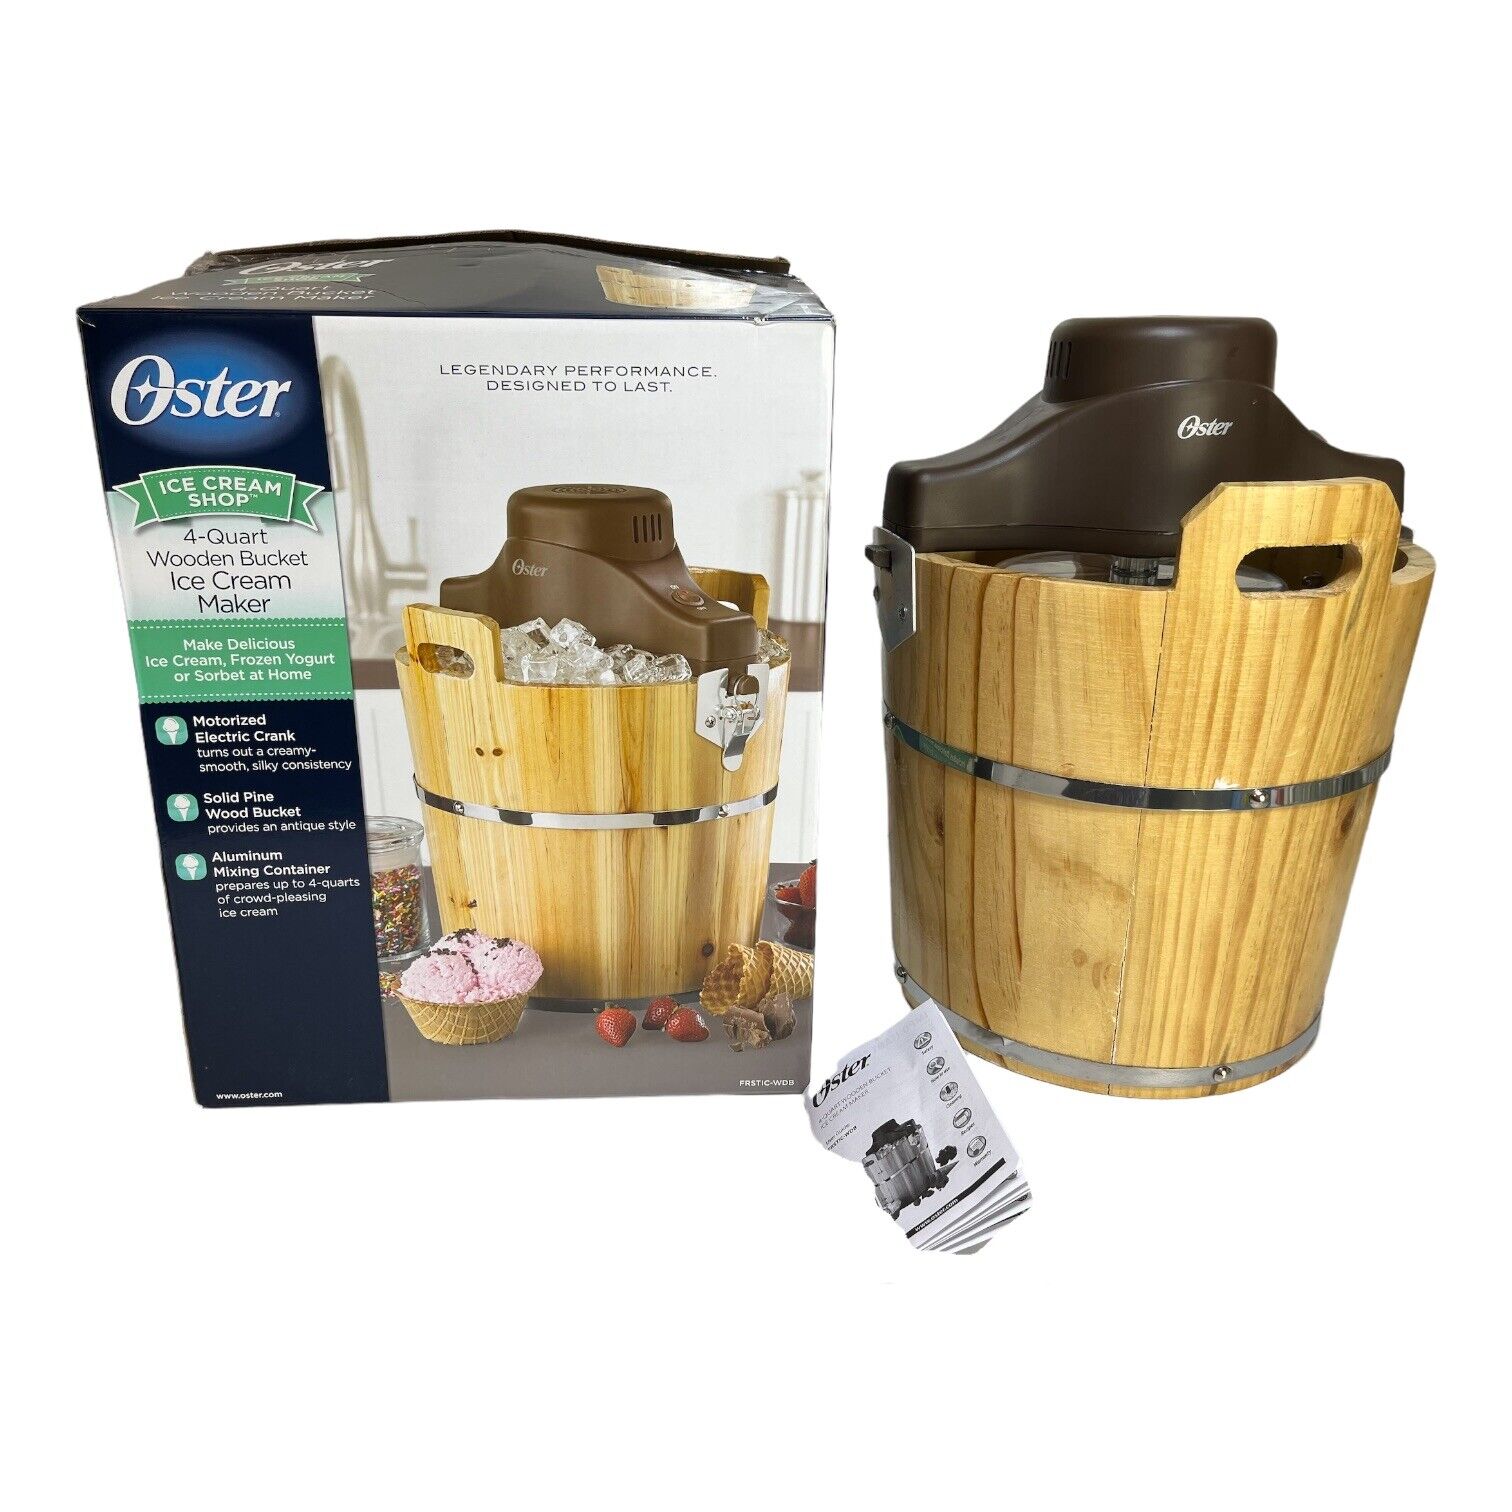 How To Use Oster 4 Quart Wooden Bucket Ice Cream Maker